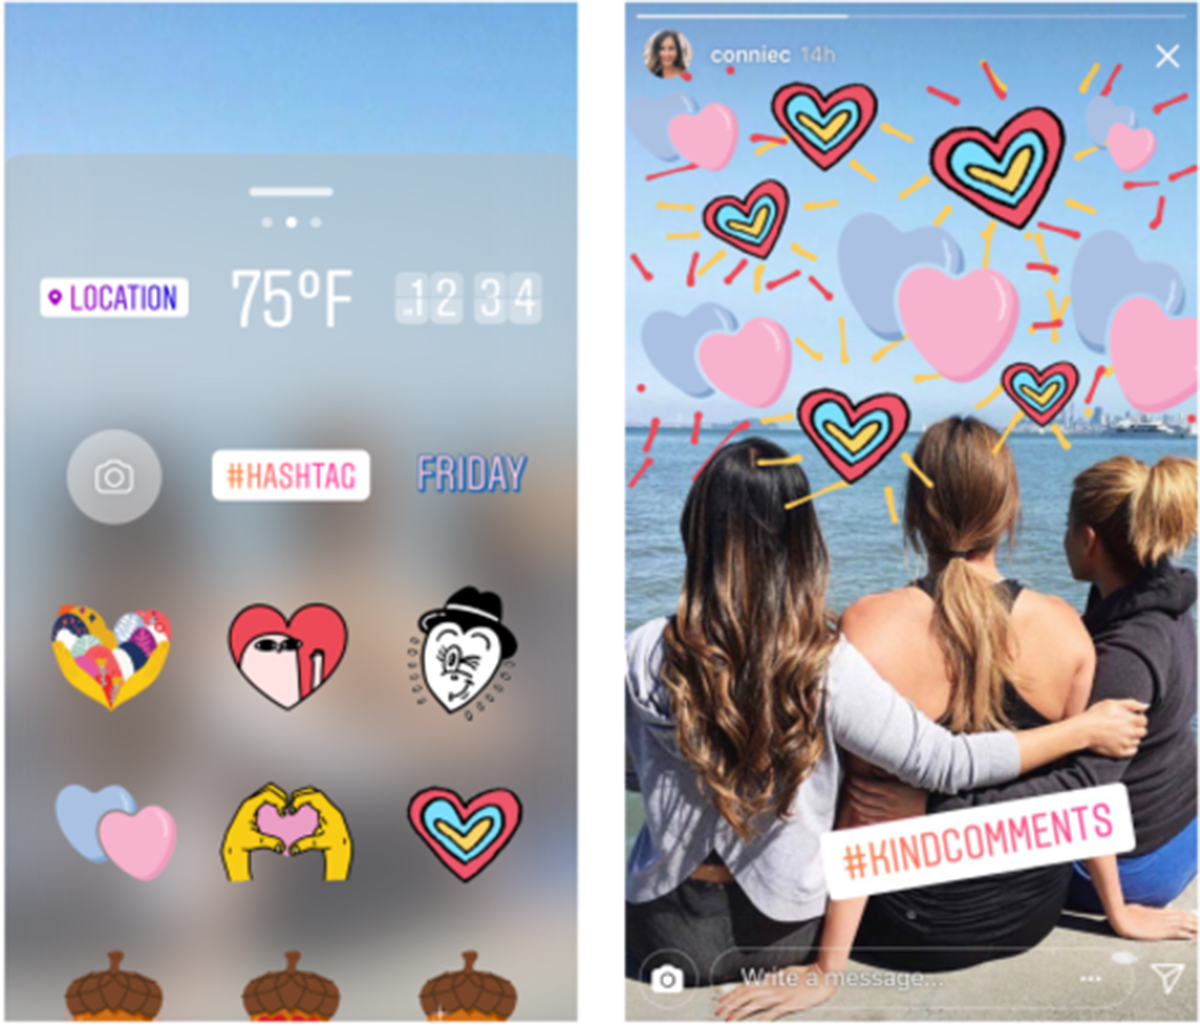 PHOTO: An illustration on the Instagram Blog which shows the kindness walls and stickers that they will be encouraging others to use. Instagram has announced that they have unveiled new settings to help fight cyberbullying.